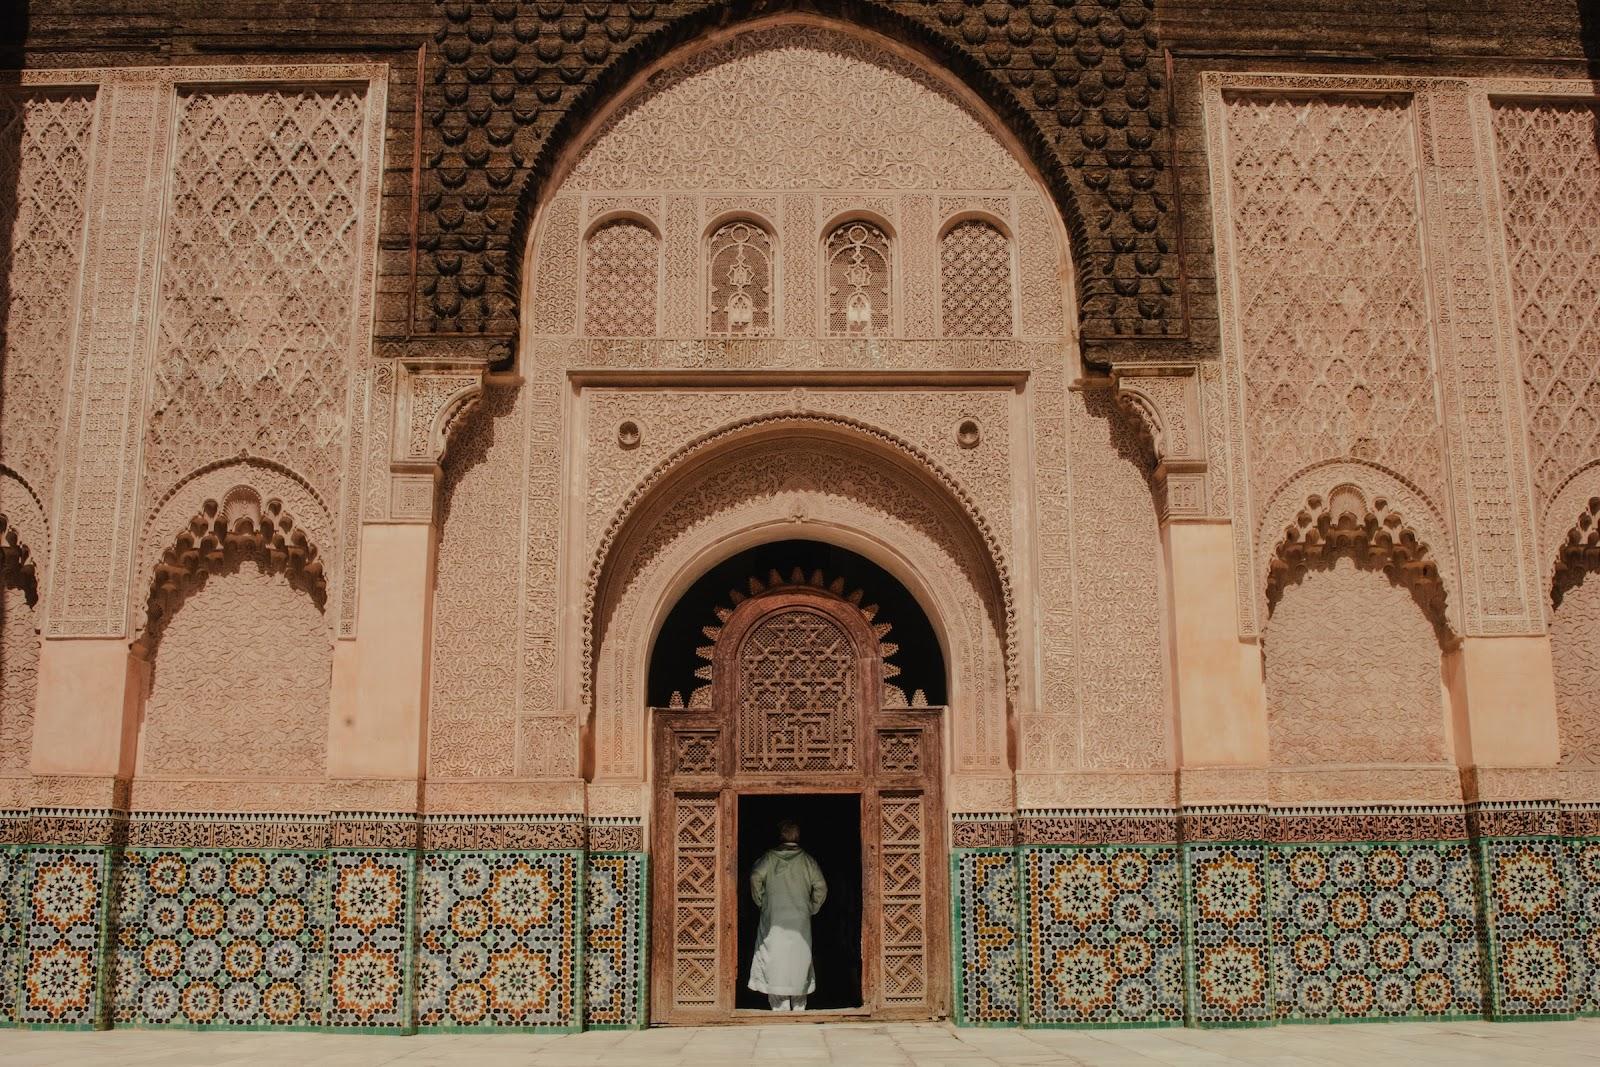 An ornate sandstone temple covered with green and yellow symmetrical tiles. Pay entrance fees in MAD